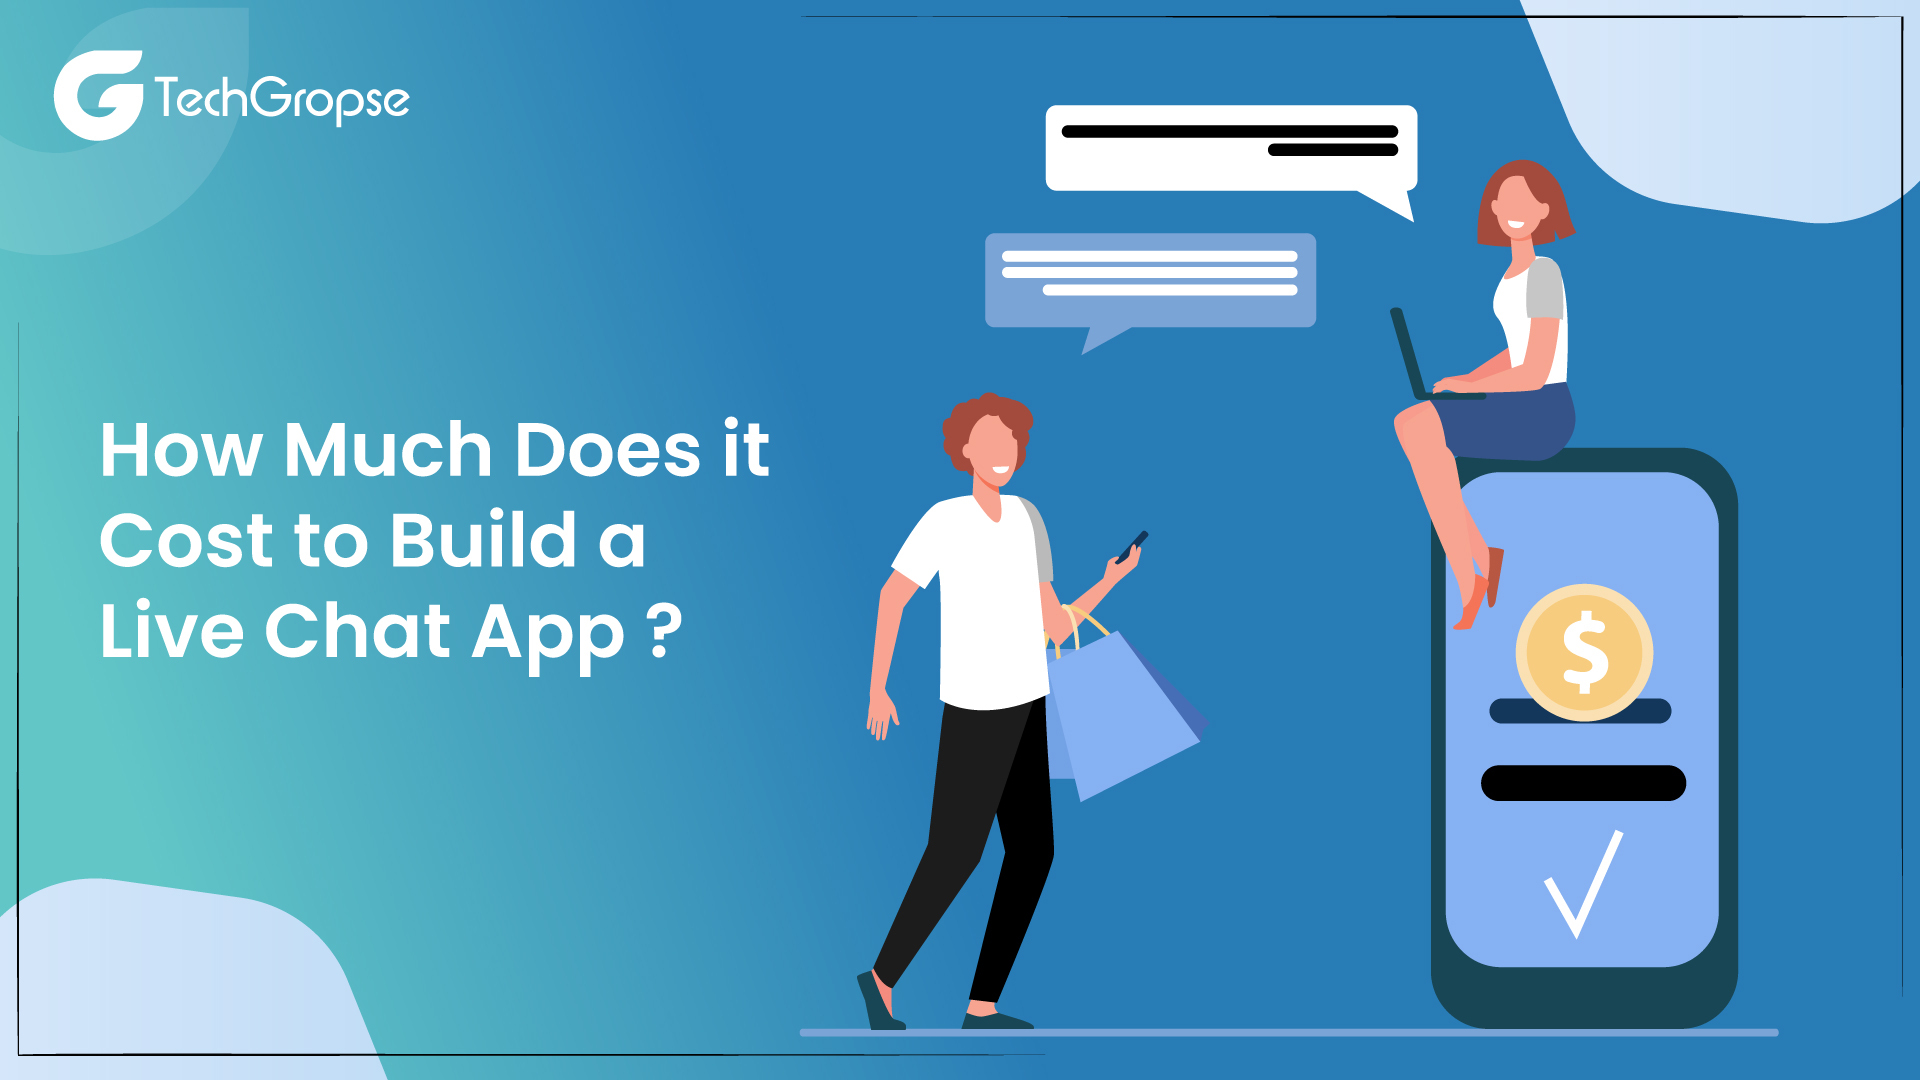 How Much Does it Cost to Build a Live Chat App?